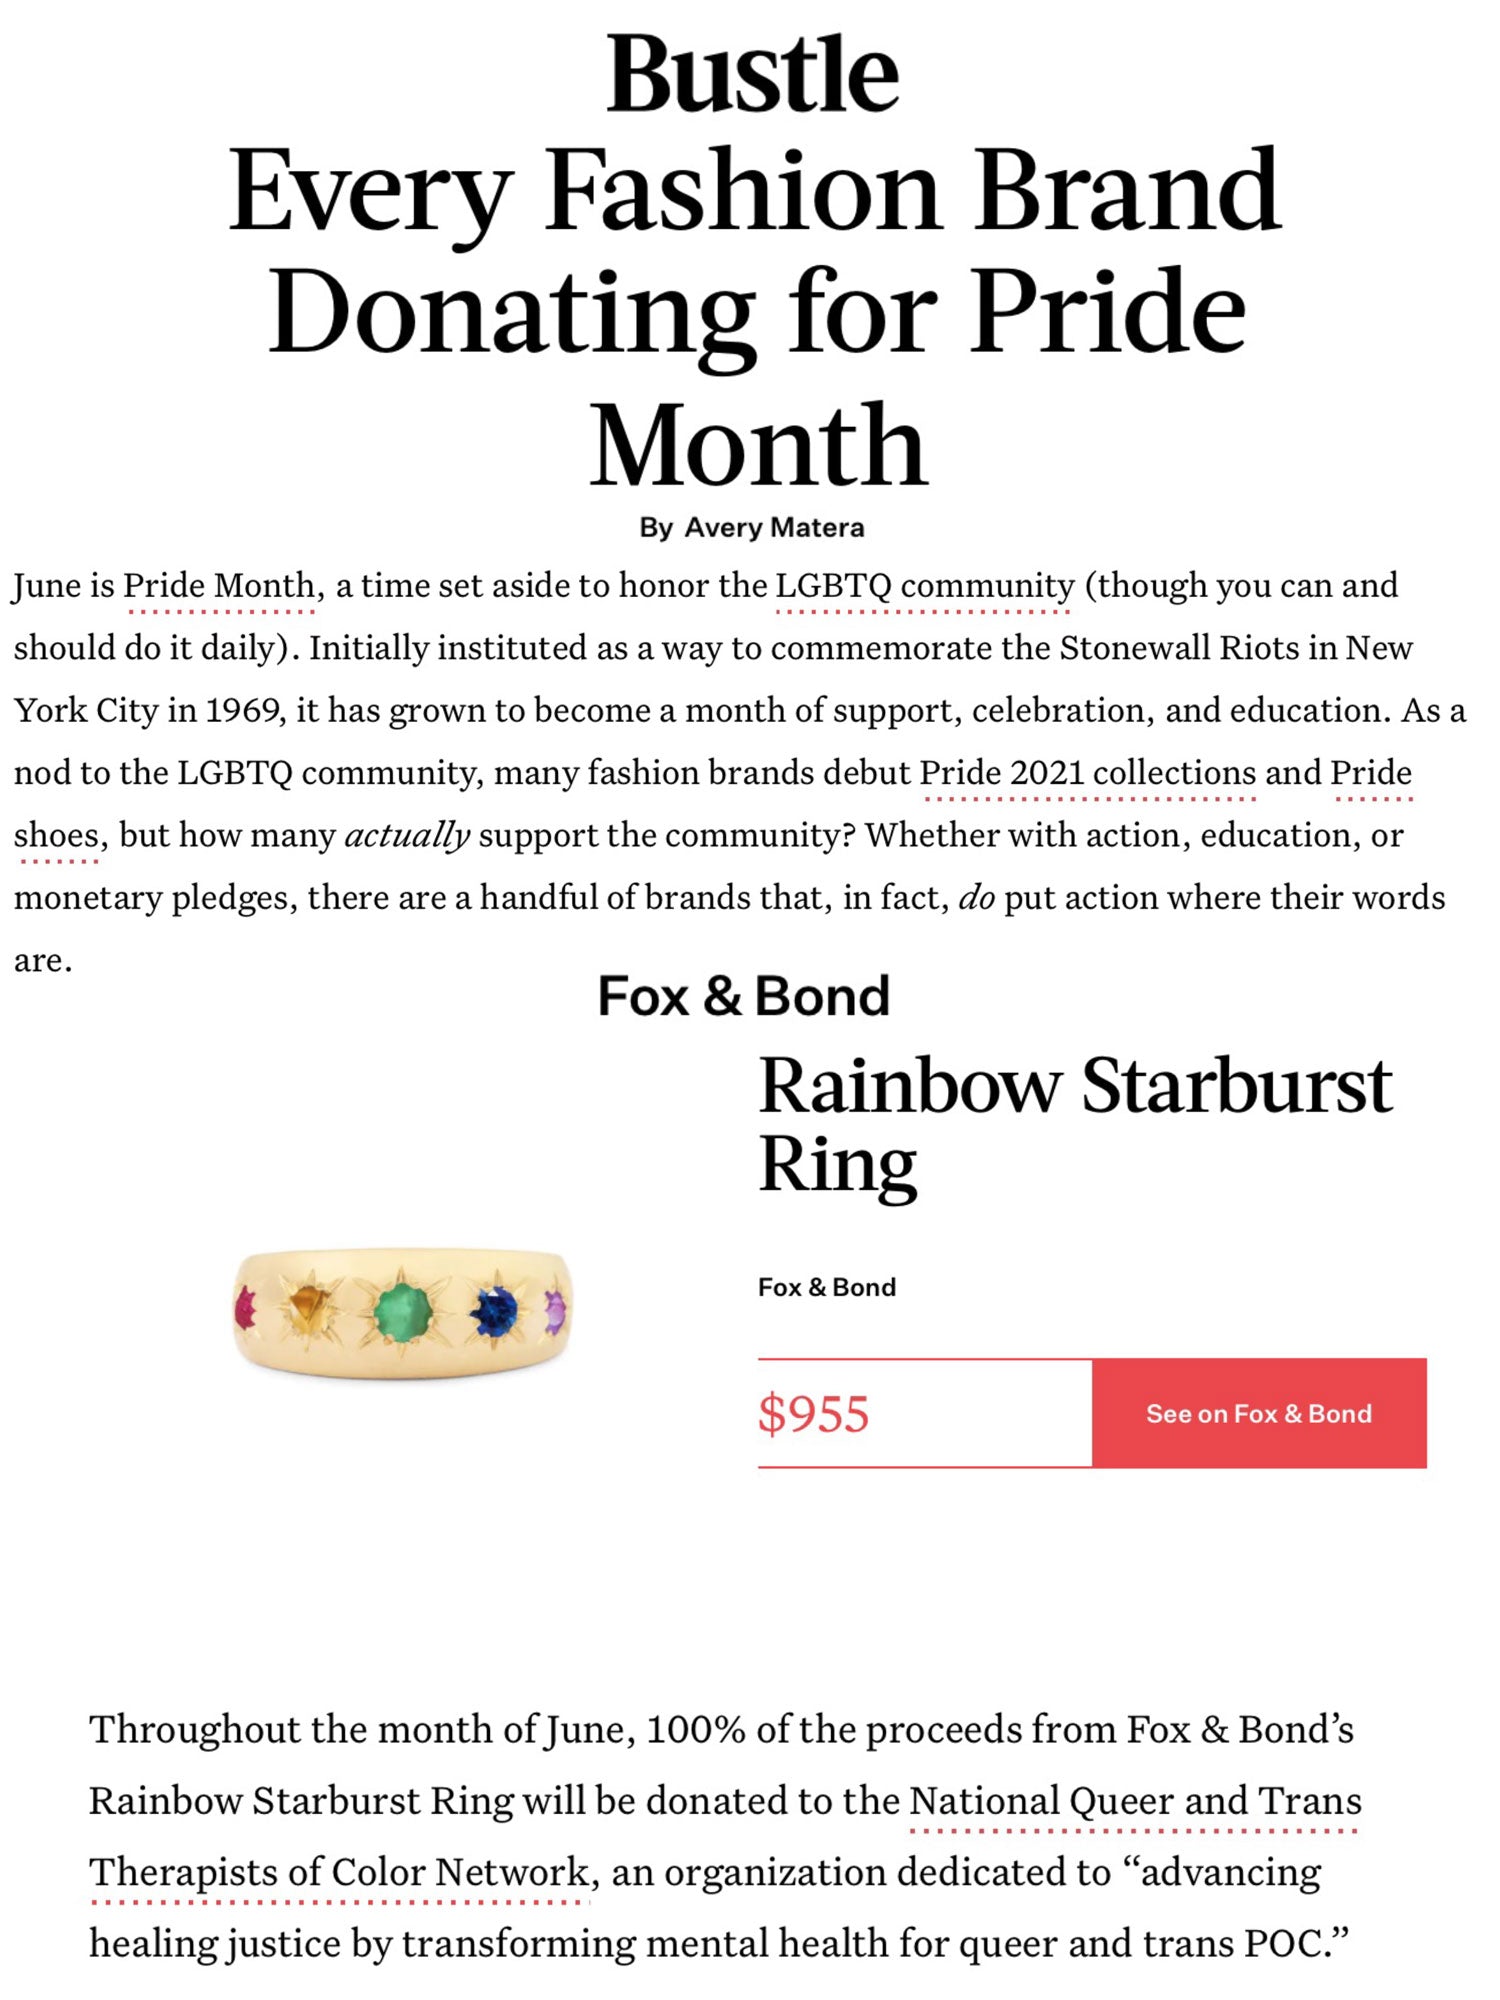 Bustle: Every Fashion Brand Donating for Pride Month